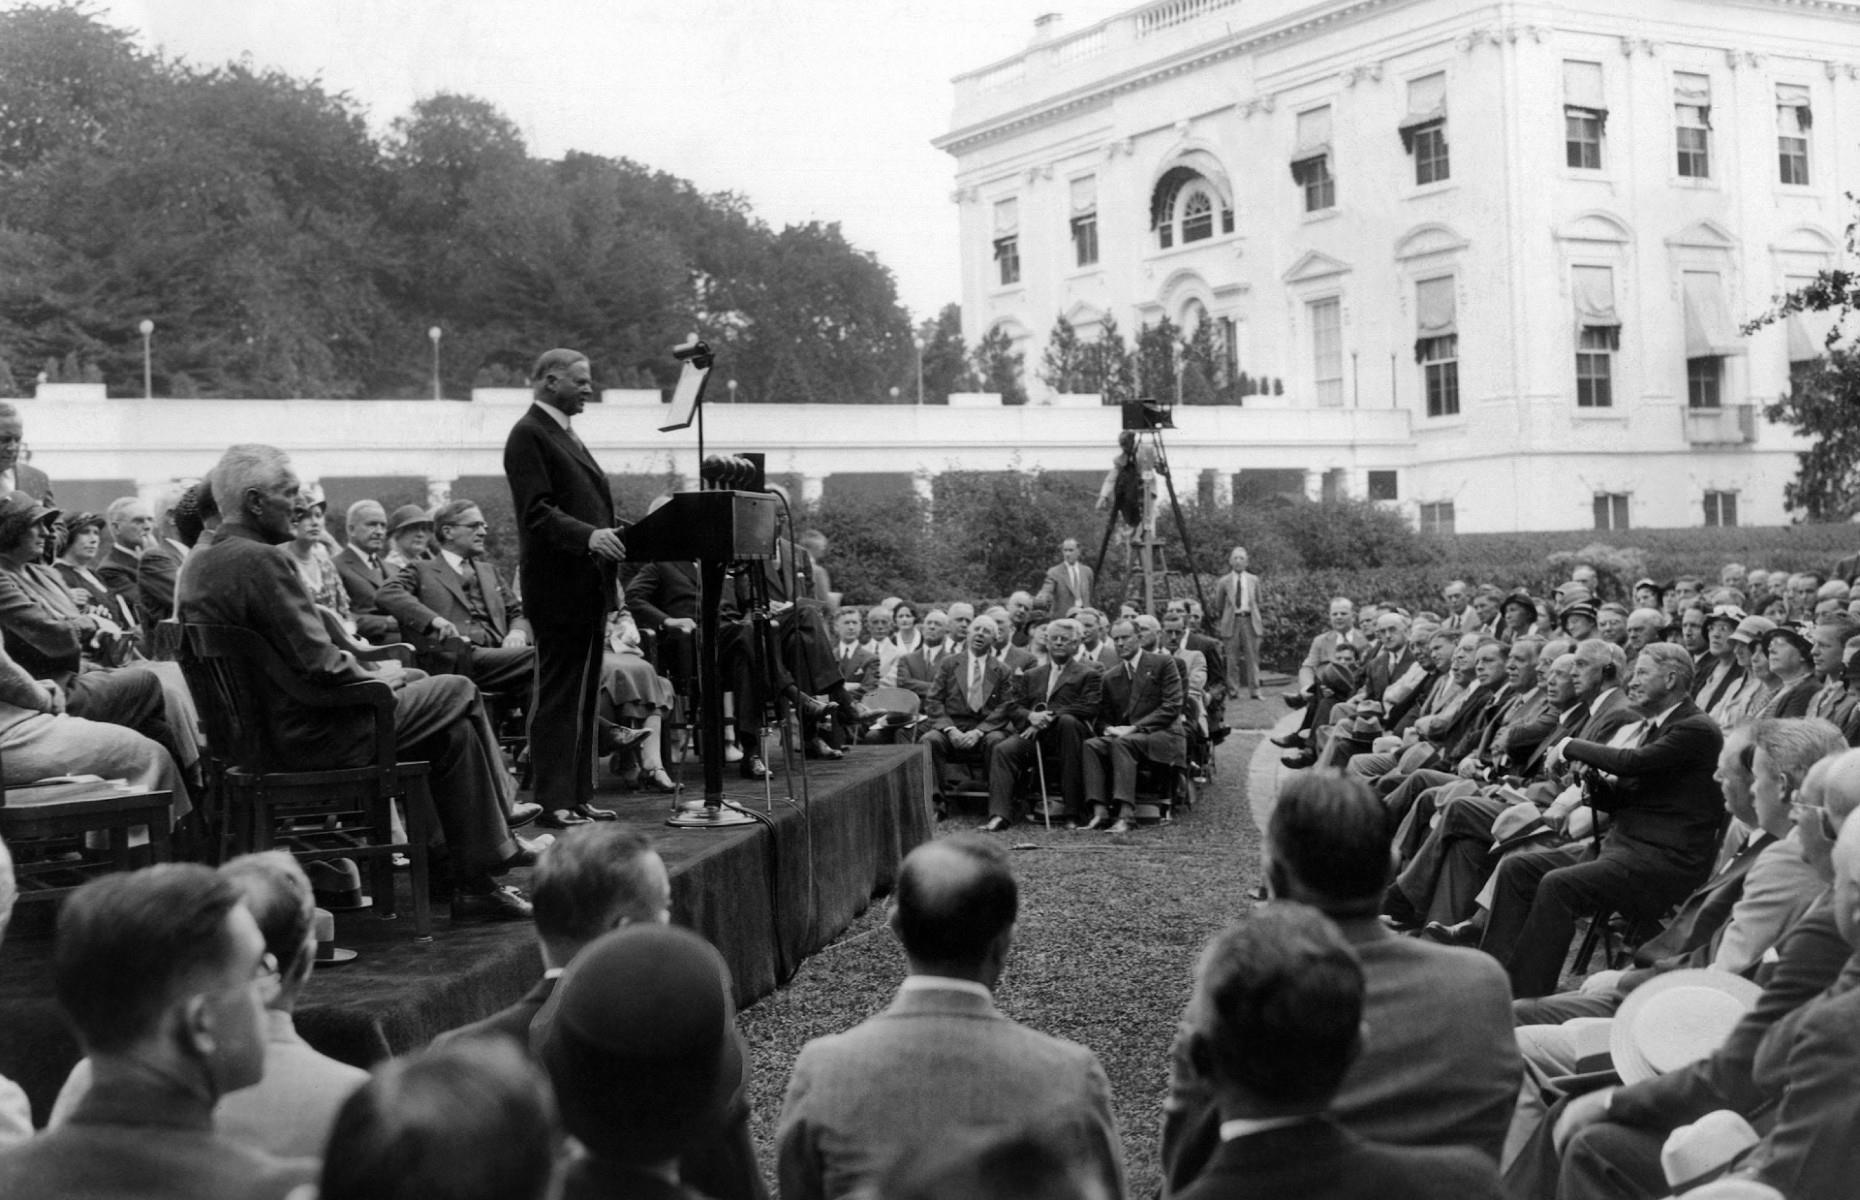 <p>President Herbert Hoover failed to recognize the severity of the Depression when it first struck and he tried to keep the federal government out of direct relief efforts.</p>  <p>In May 1932, President Hoover finally got to his feet and promised greater state aid for poverty-stricken Americans in a news conference at the White House. It was too little, too late. Most voters had already made their minds up that Hoover was to blame for the dire state of the country.</p>  <p><strong>Liking this? Click on the Follow button above for more great stories from loveEXPLORING</strong></p>